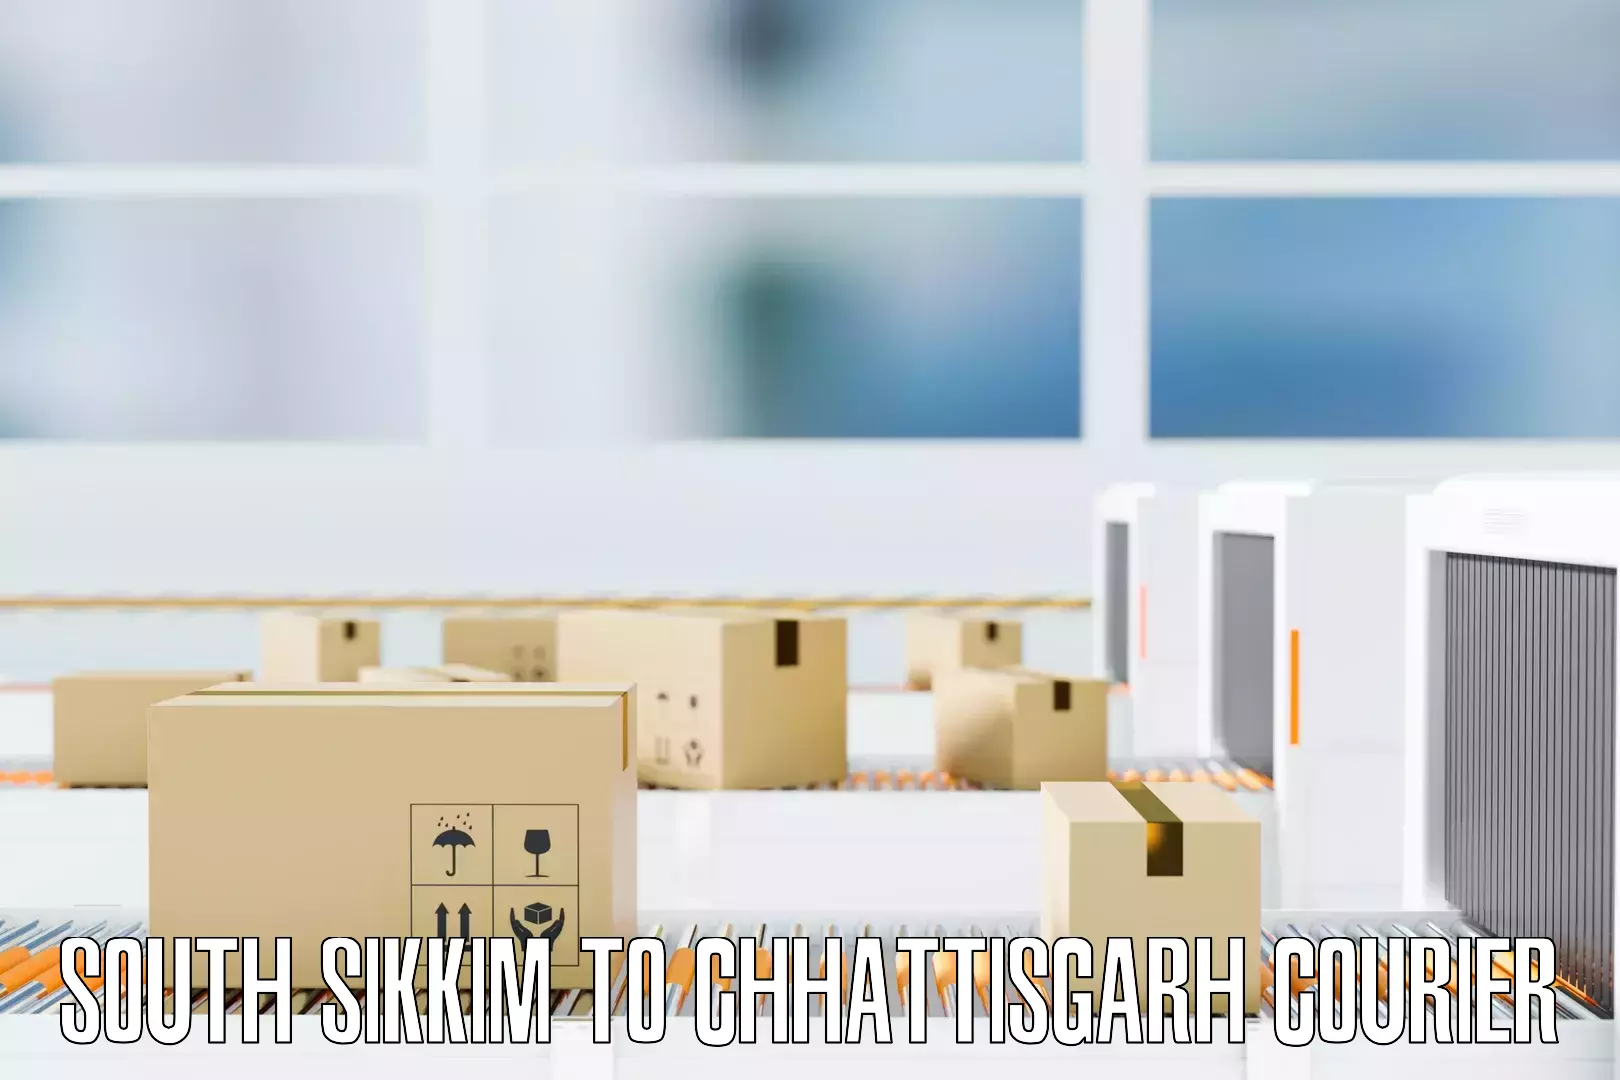 Full home moving services South Sikkim to Chhattisgarh